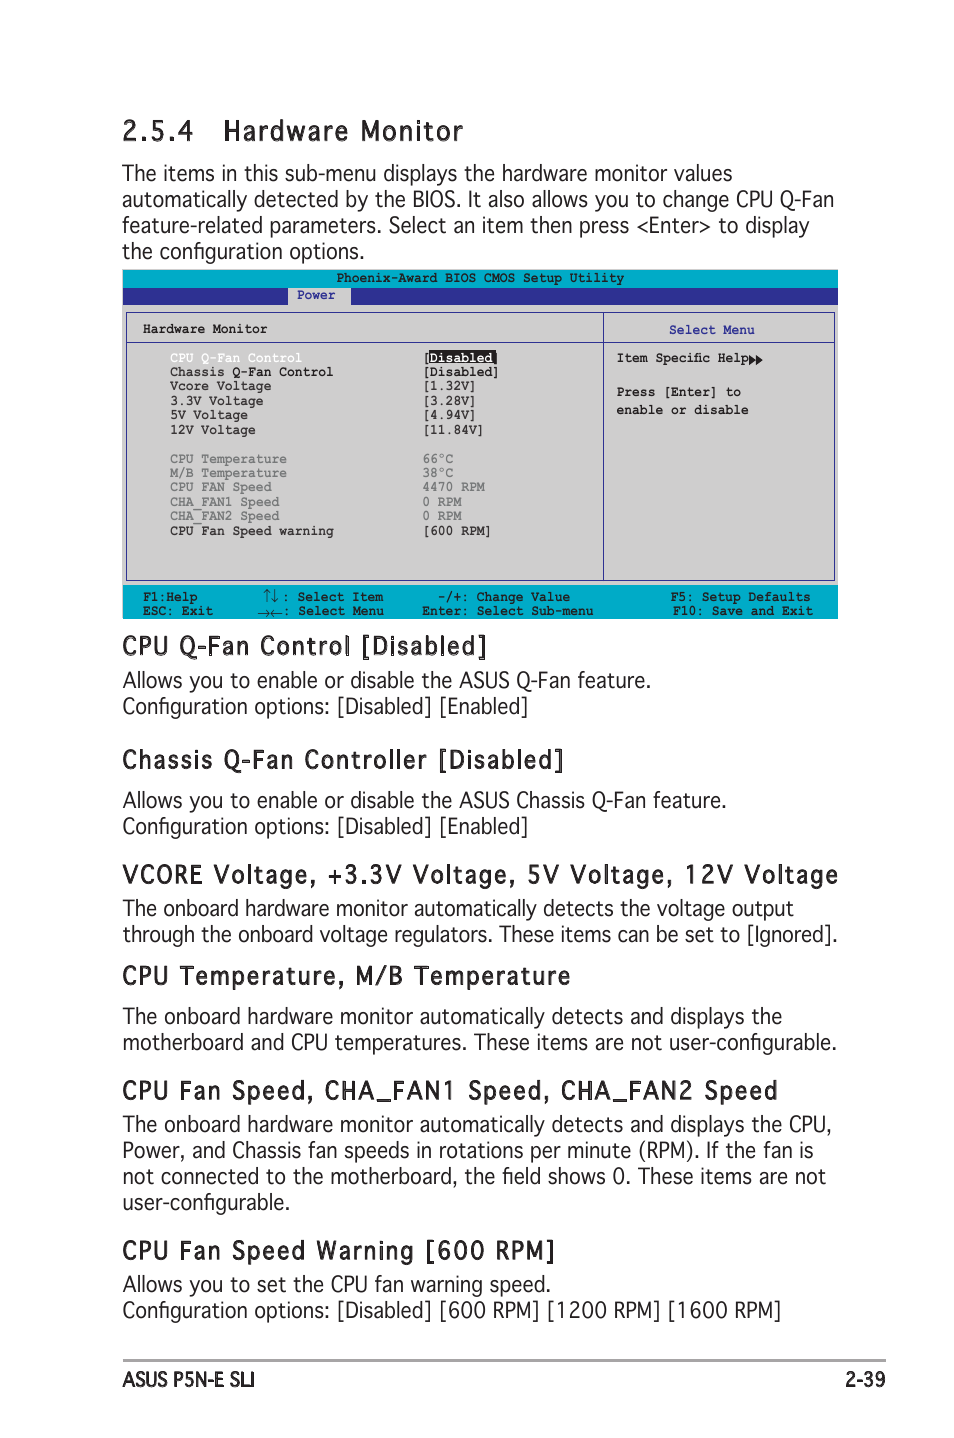 4 hardware monitor, Cpu q-fan control [disabled, Chassis q-fan controller  [disabled | Asus P5N-E SLI User Manual | Page 91 / 122 | Original mode